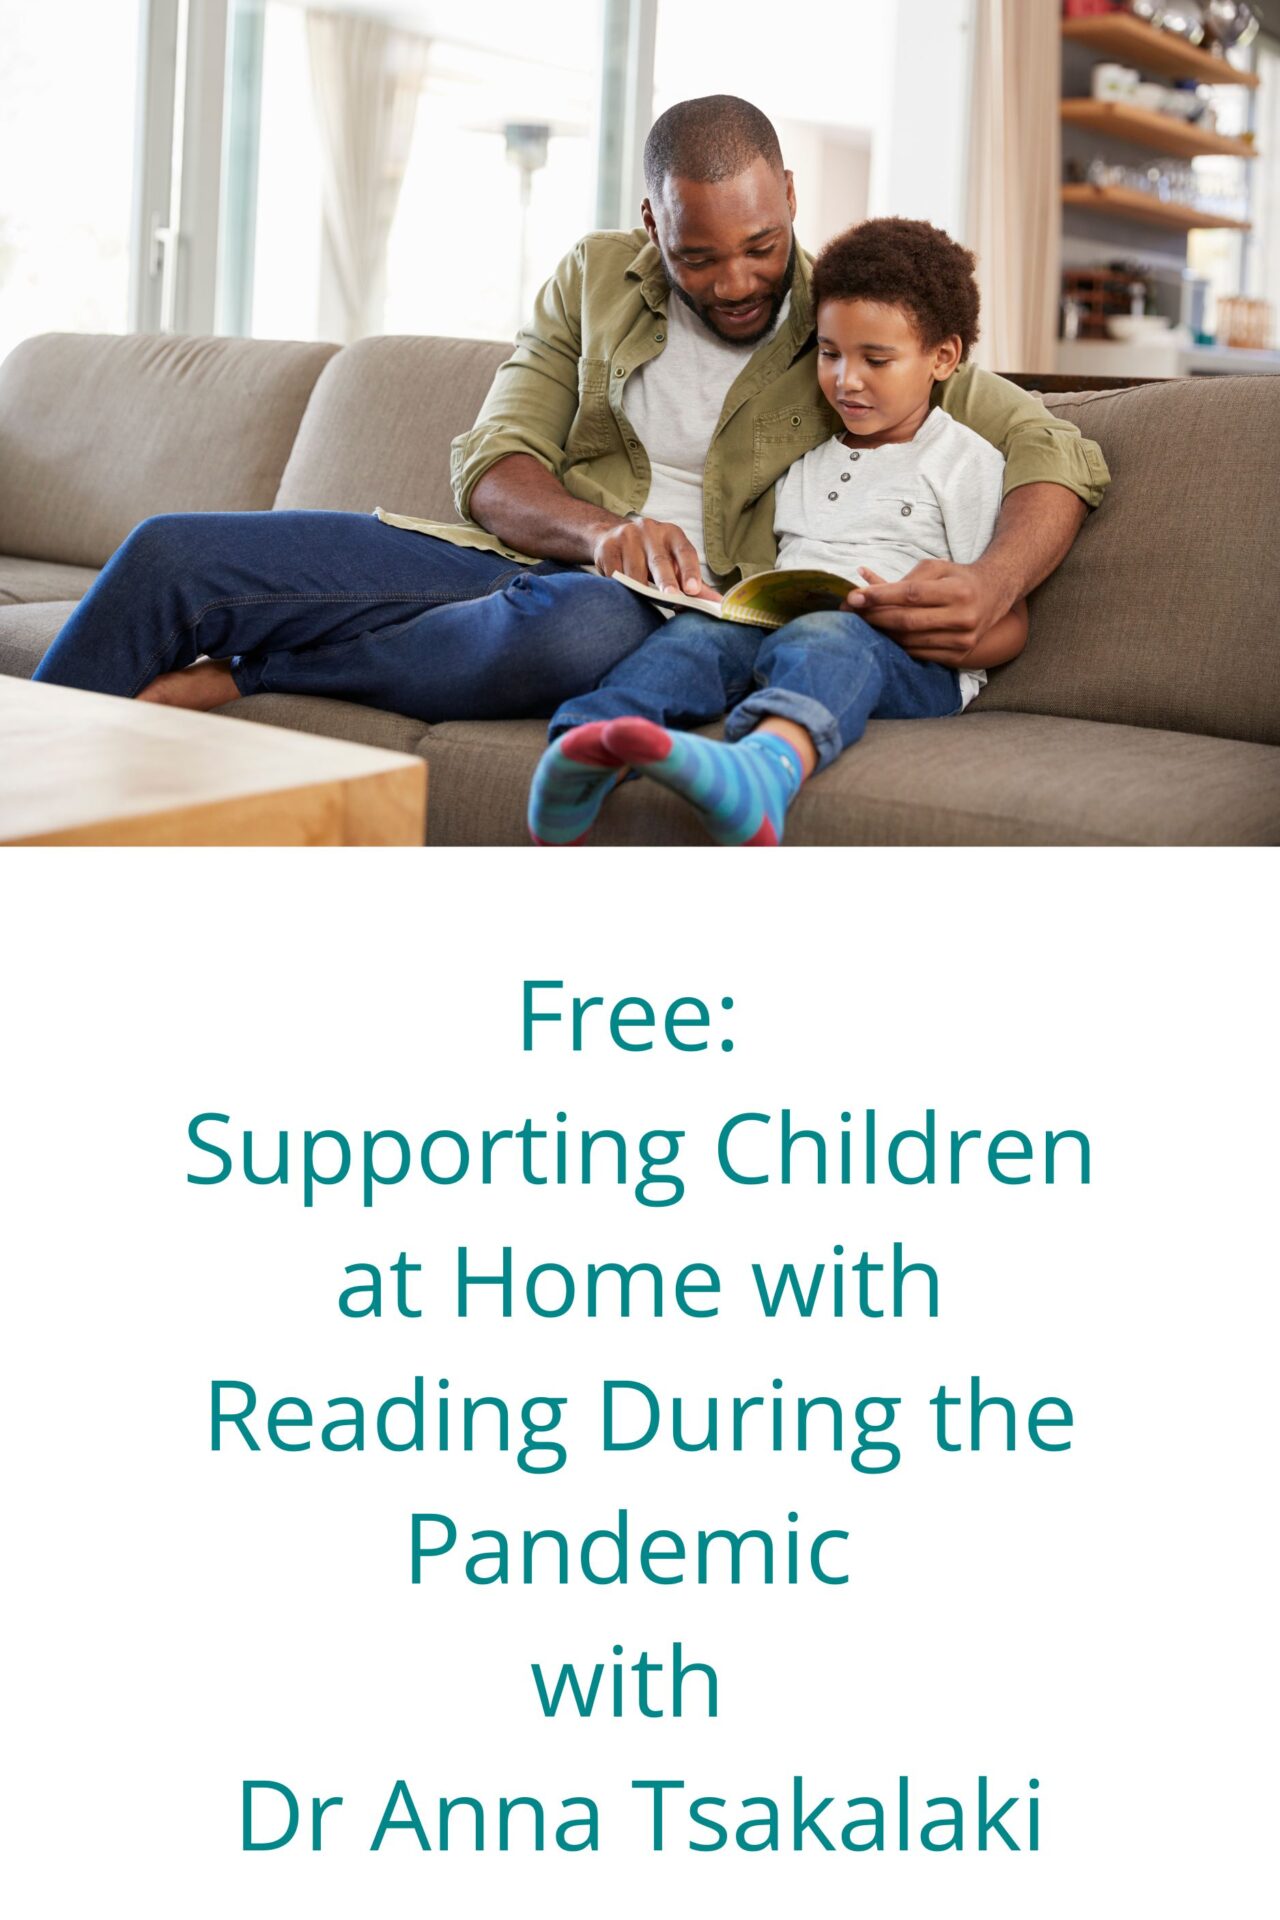 Free talk on results of research into reading to children at home during the pandemic